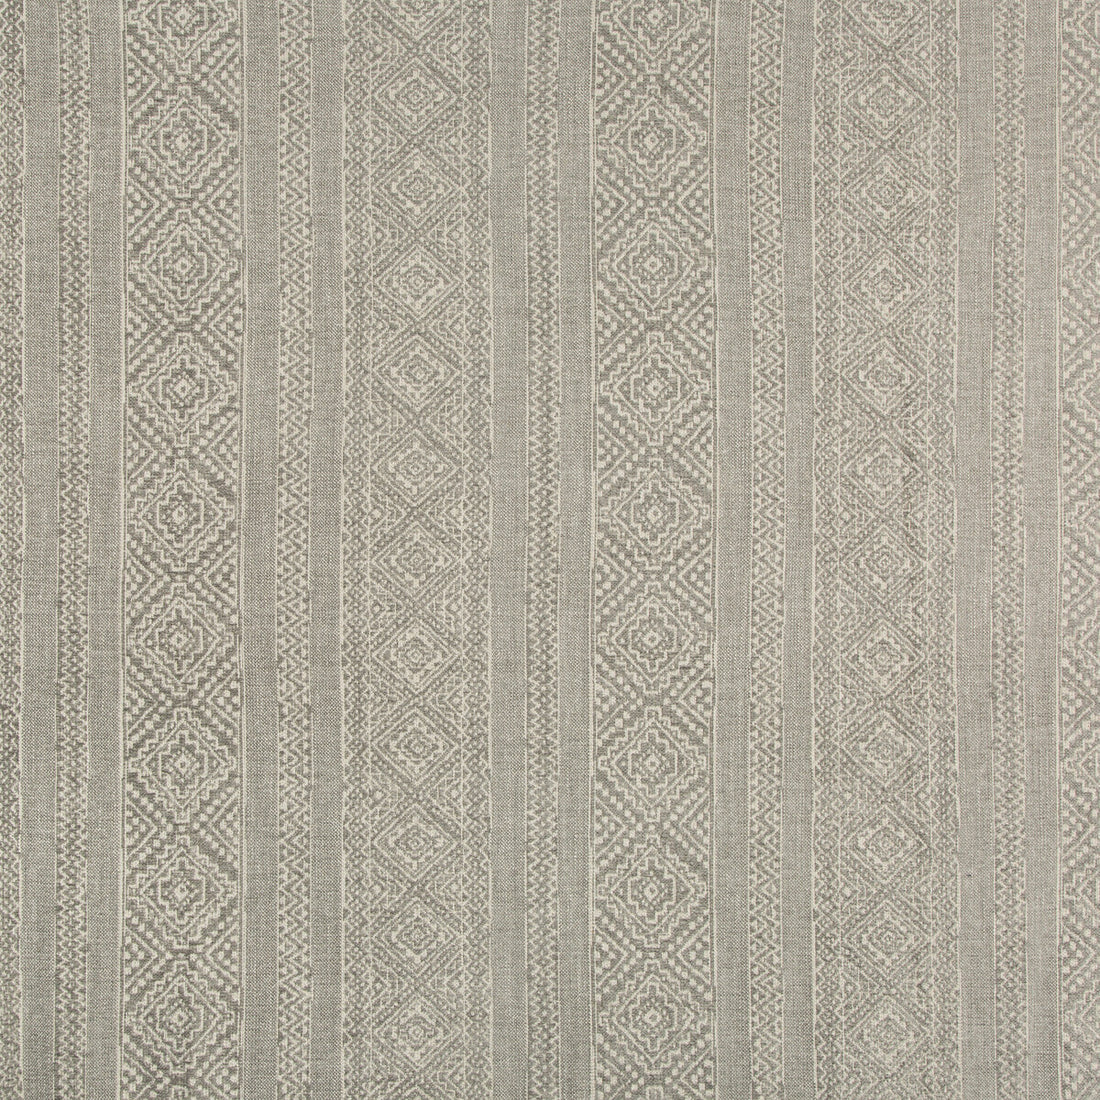 Wanderwide fabric in grey color - pattern 35562.11.0 - by Kravet Couture in the Modern Colors-Sojourn Collection collection